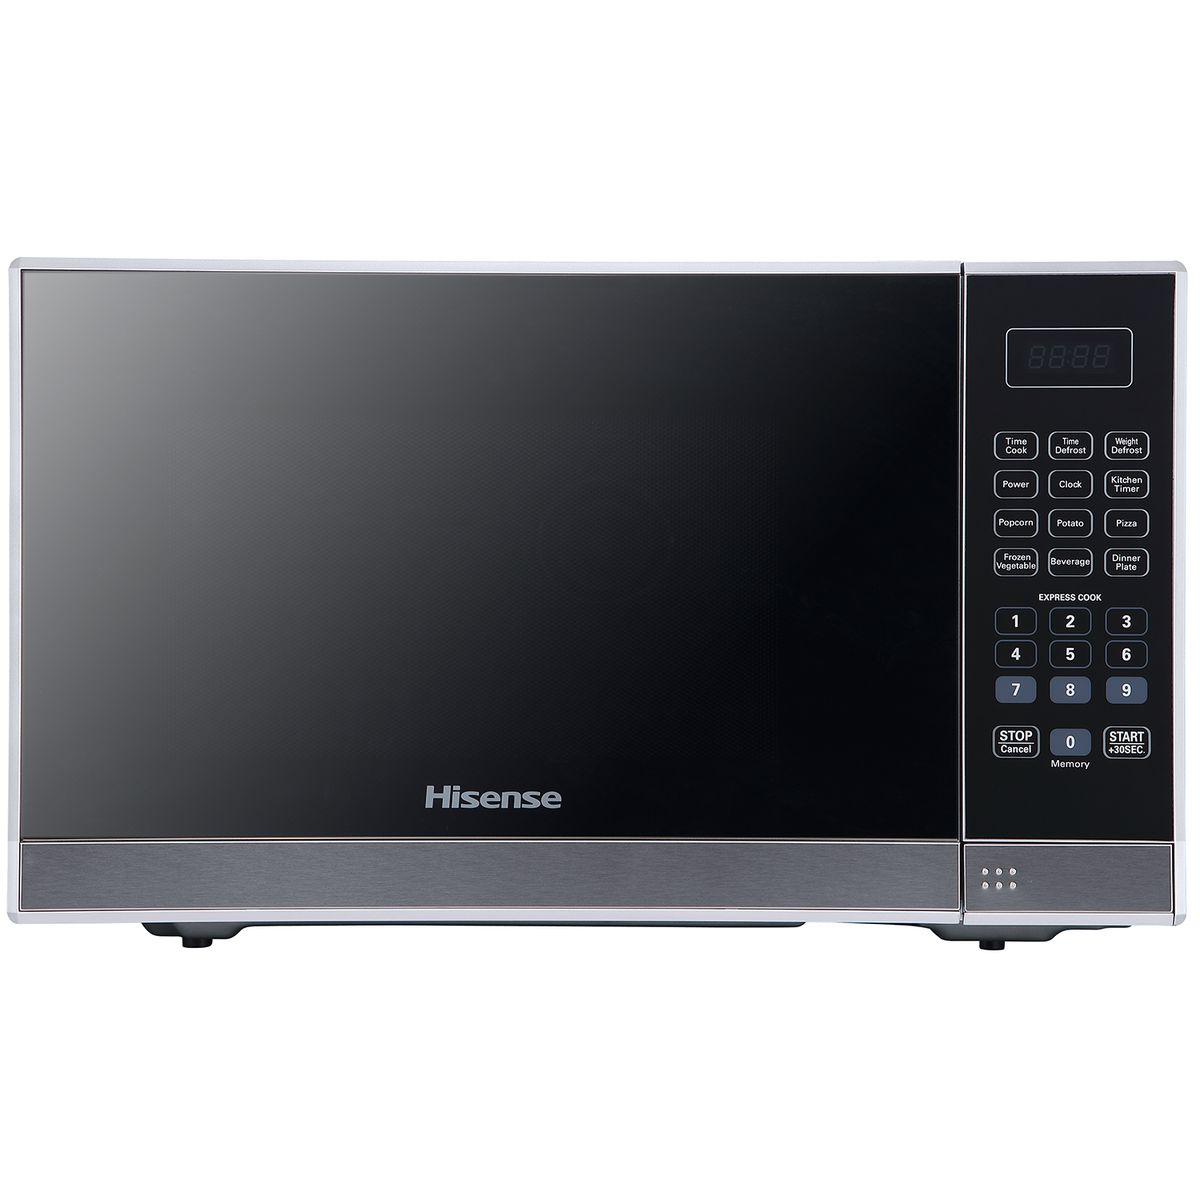 Hisense - 36 Litre Microwave Oven - Mirror Silver Buy Online in Zimbabwe thedailysale.shop